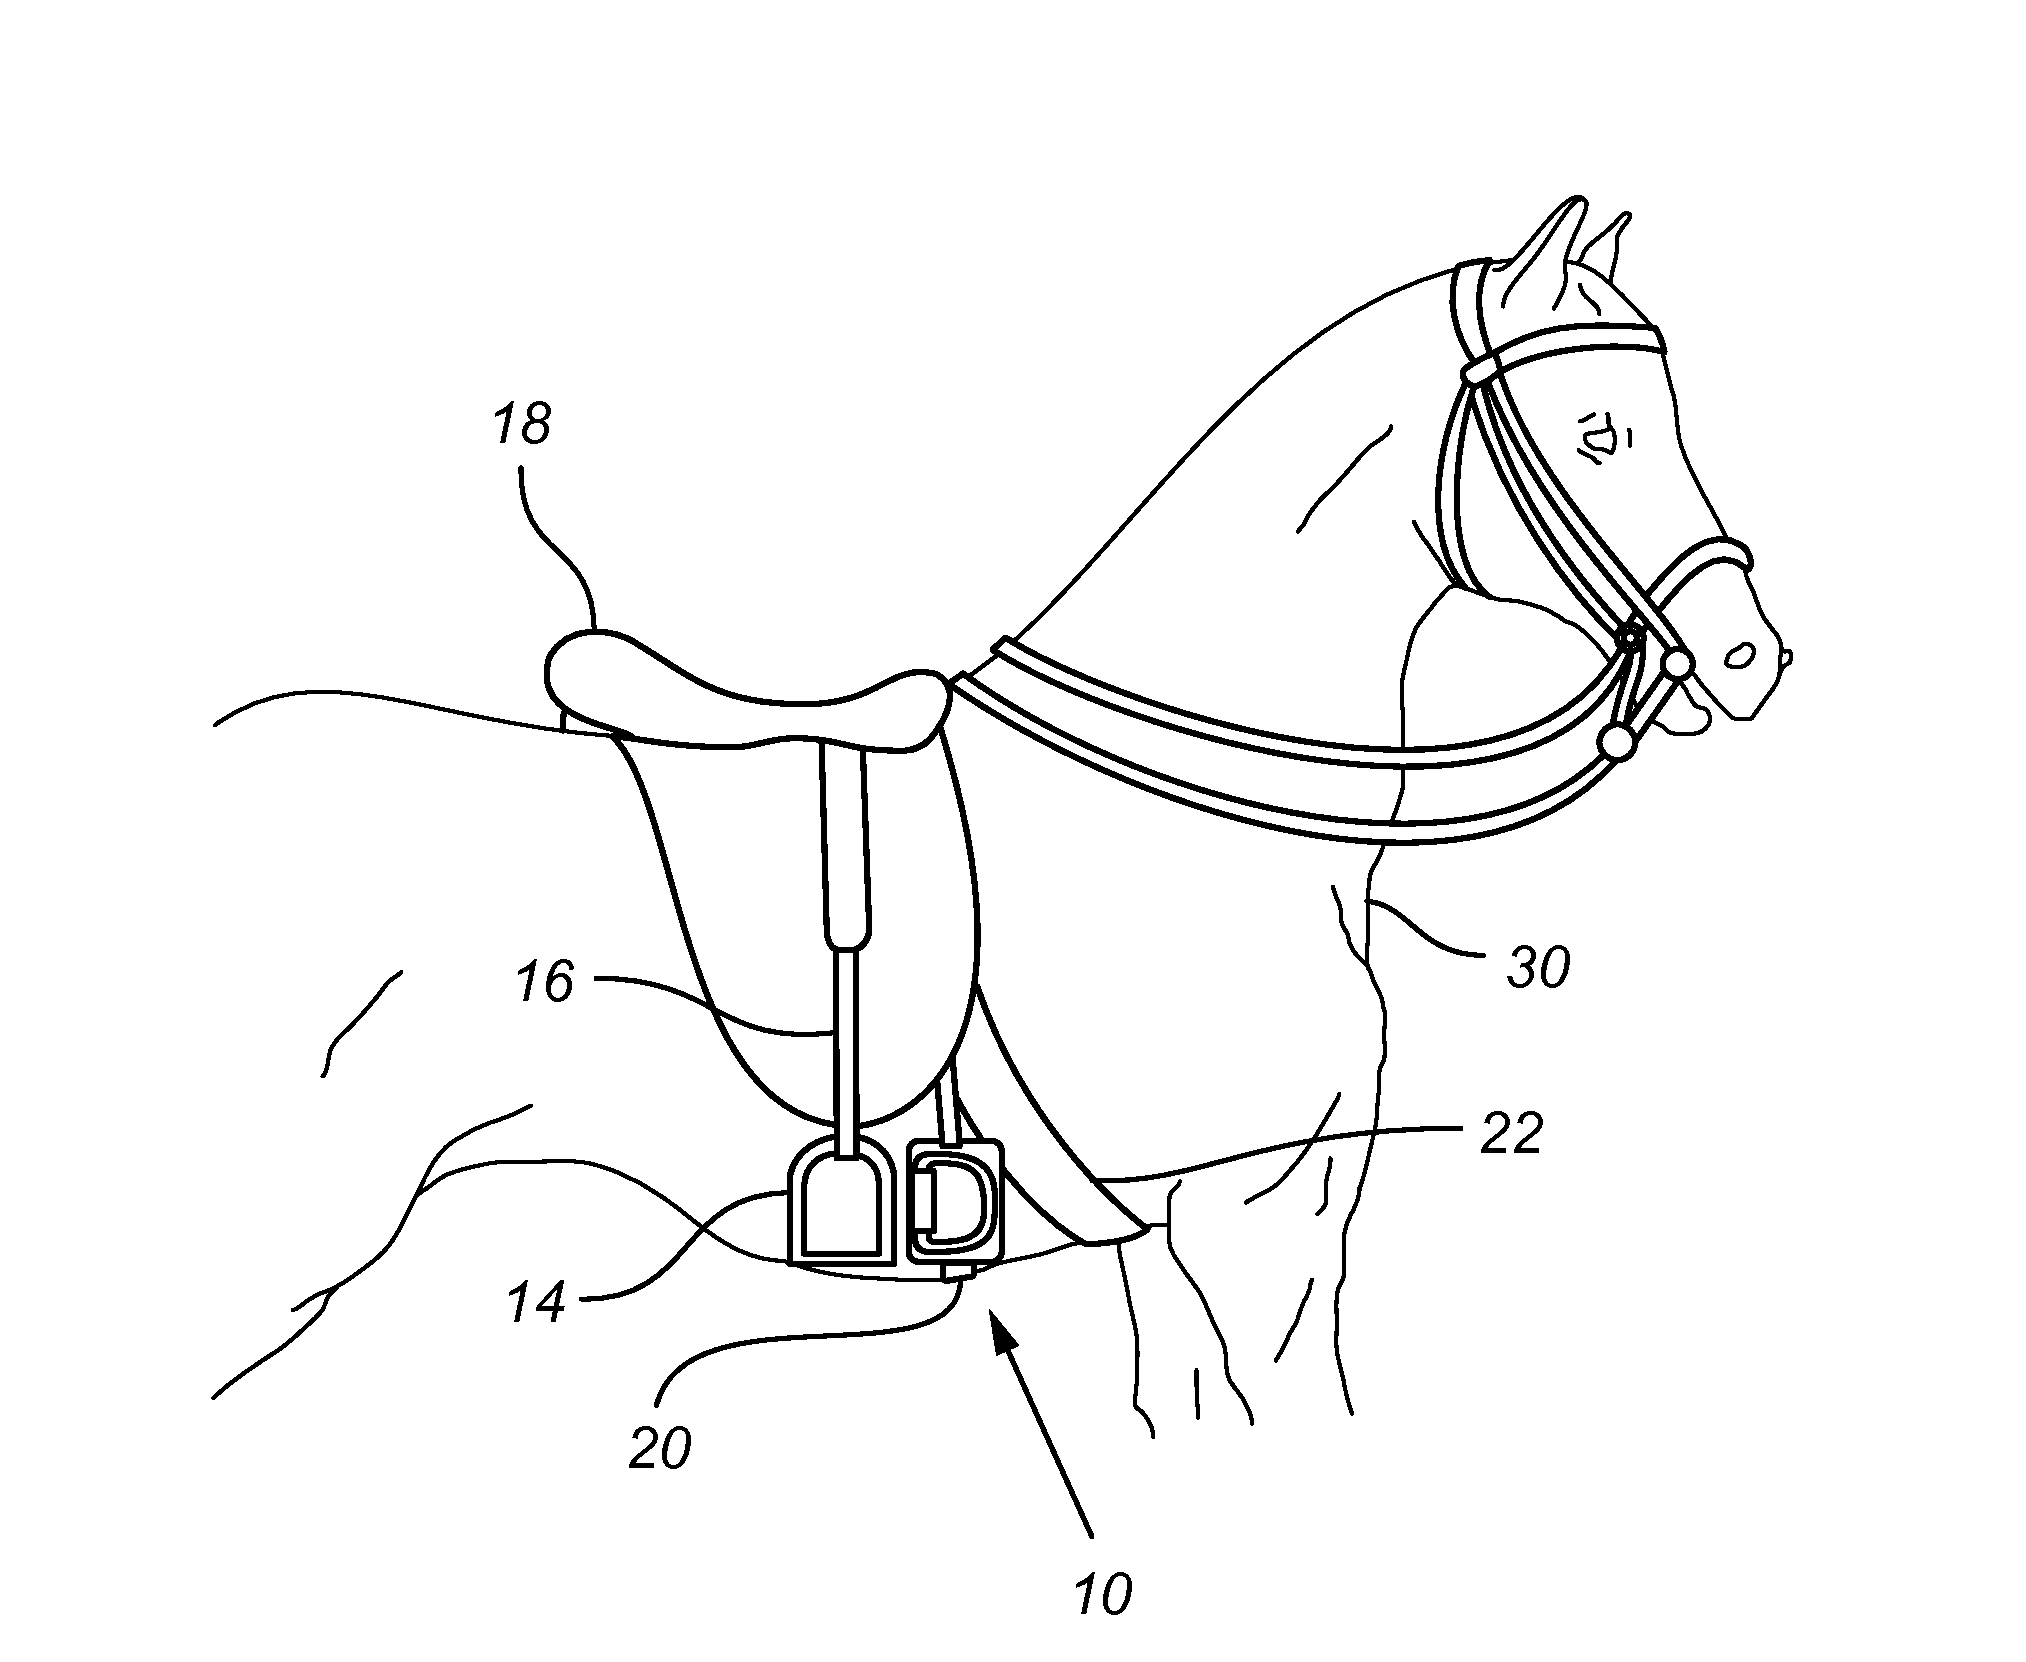 System for Use in Horseback Riding